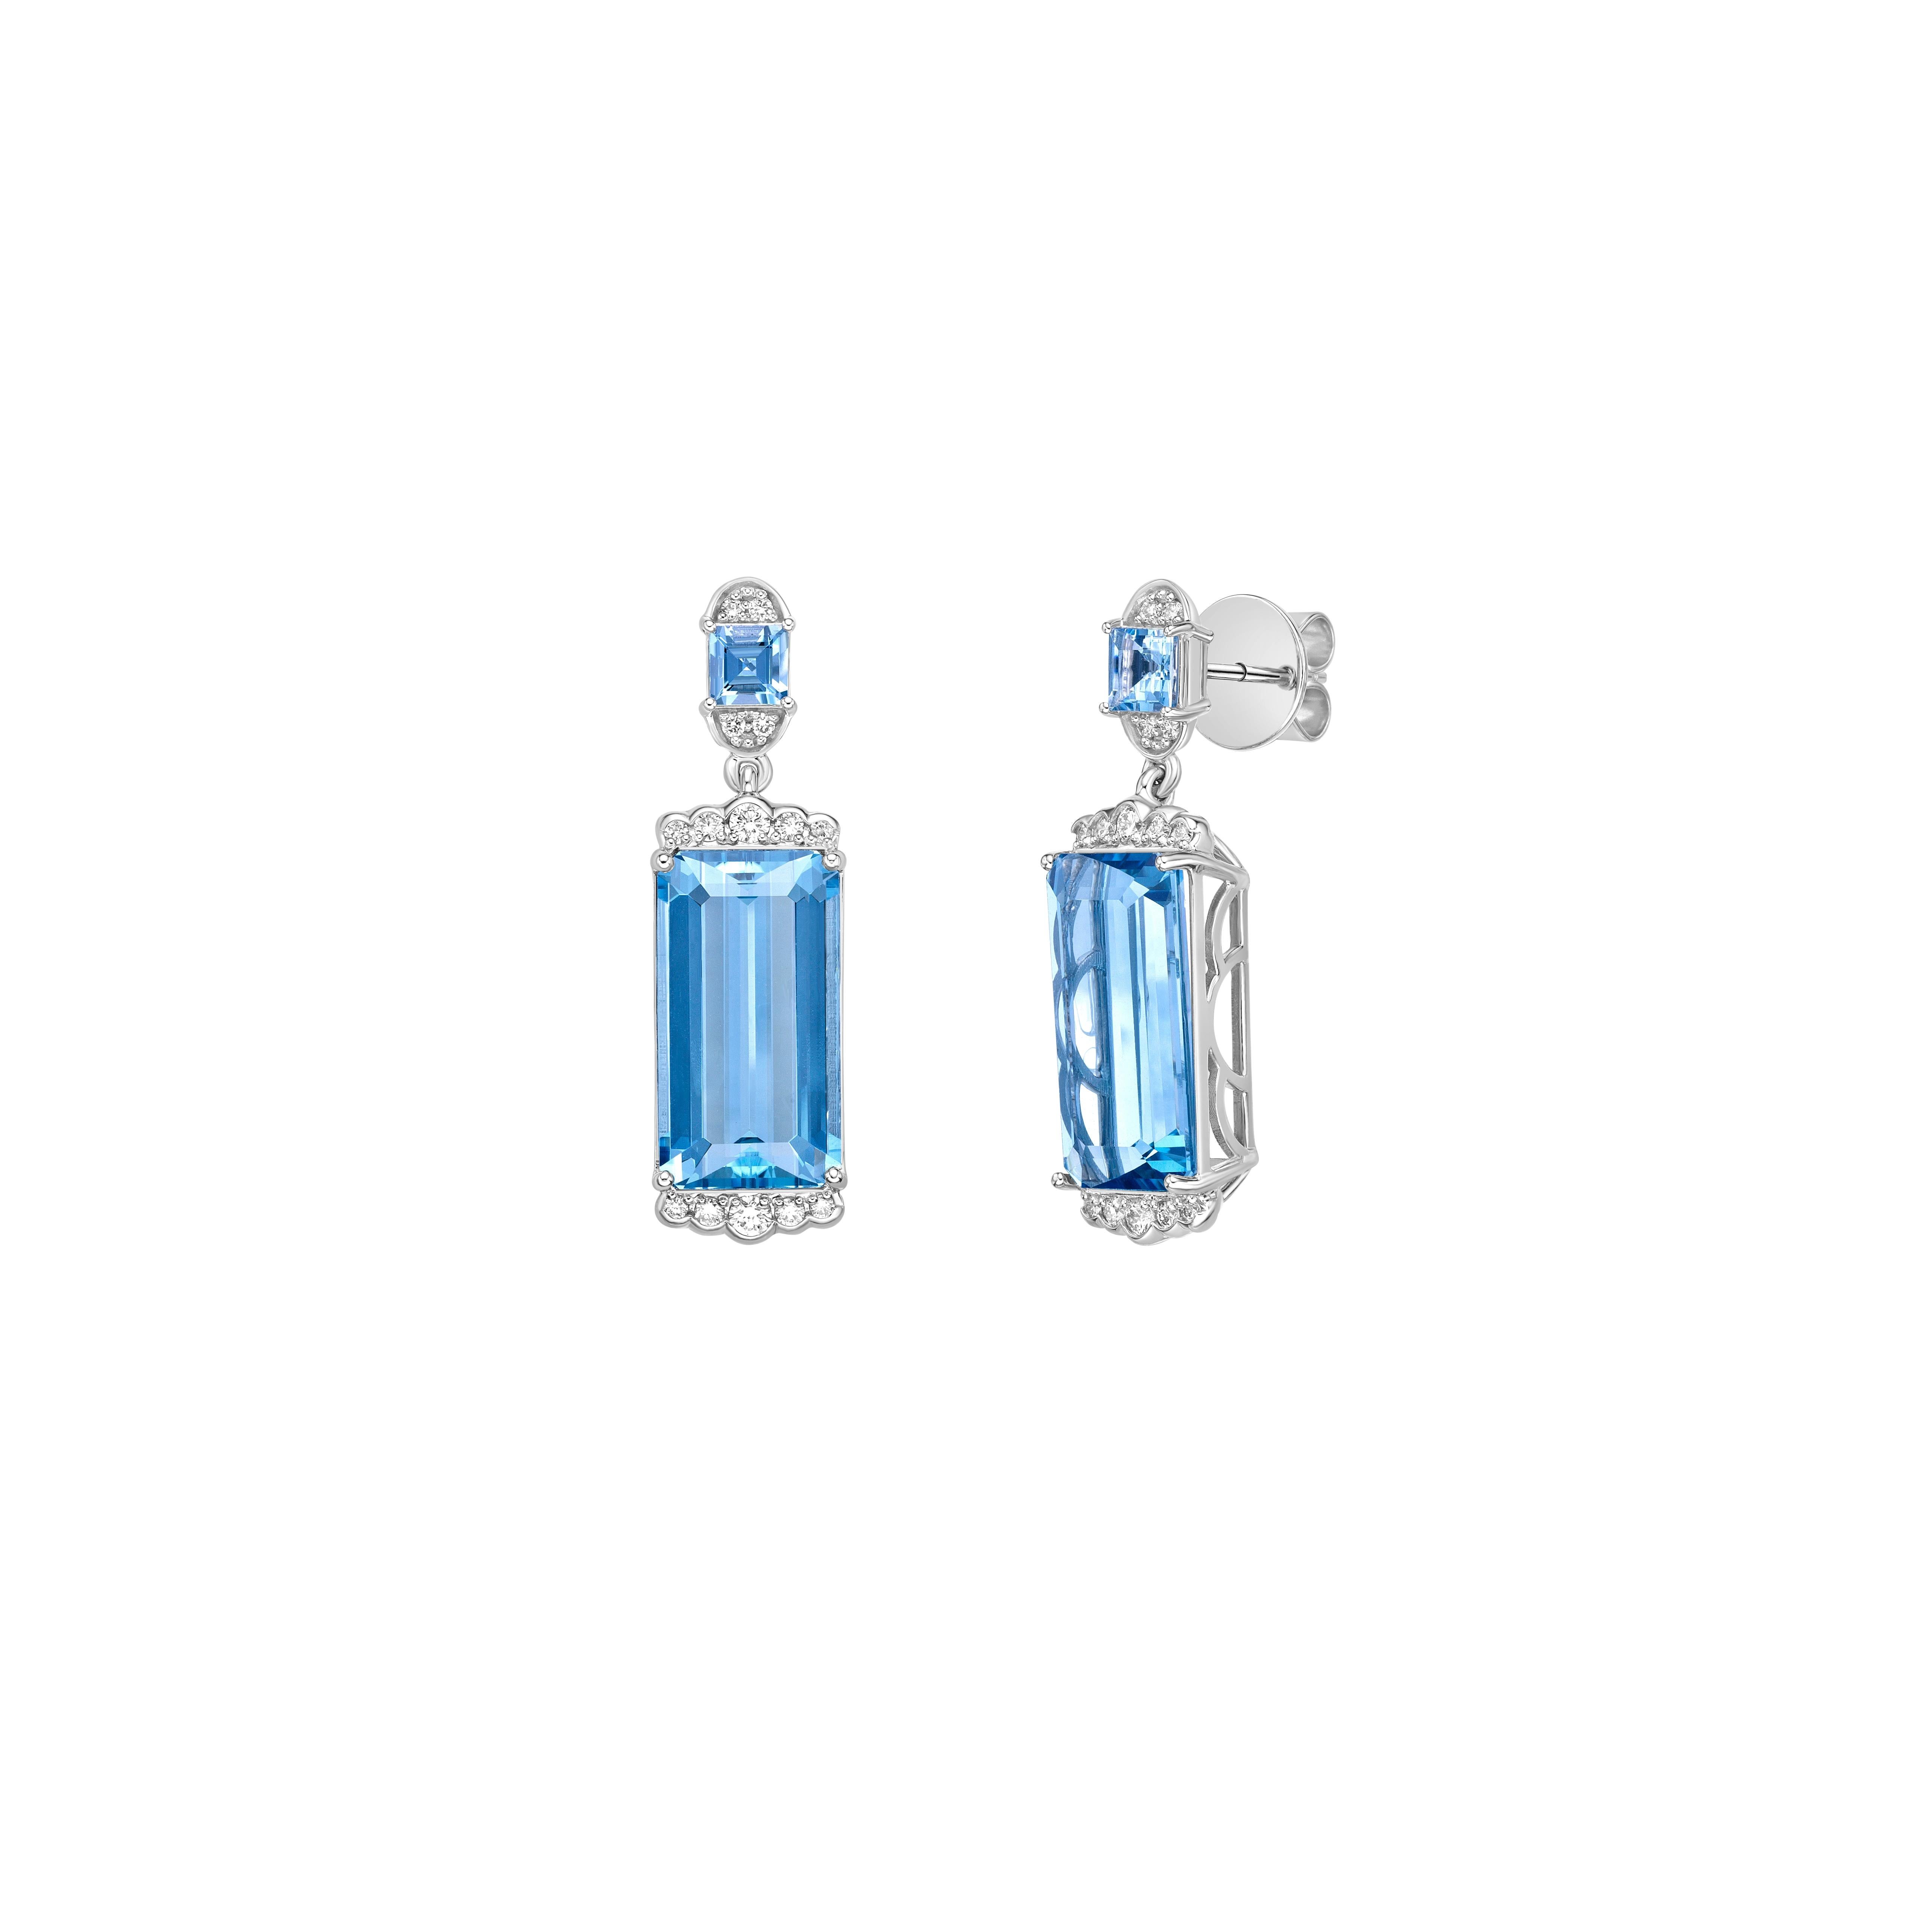 Octagon Cut 14.03 Carat Aquamarine Drop Earring in 18KWG with White Diamond. For Sale